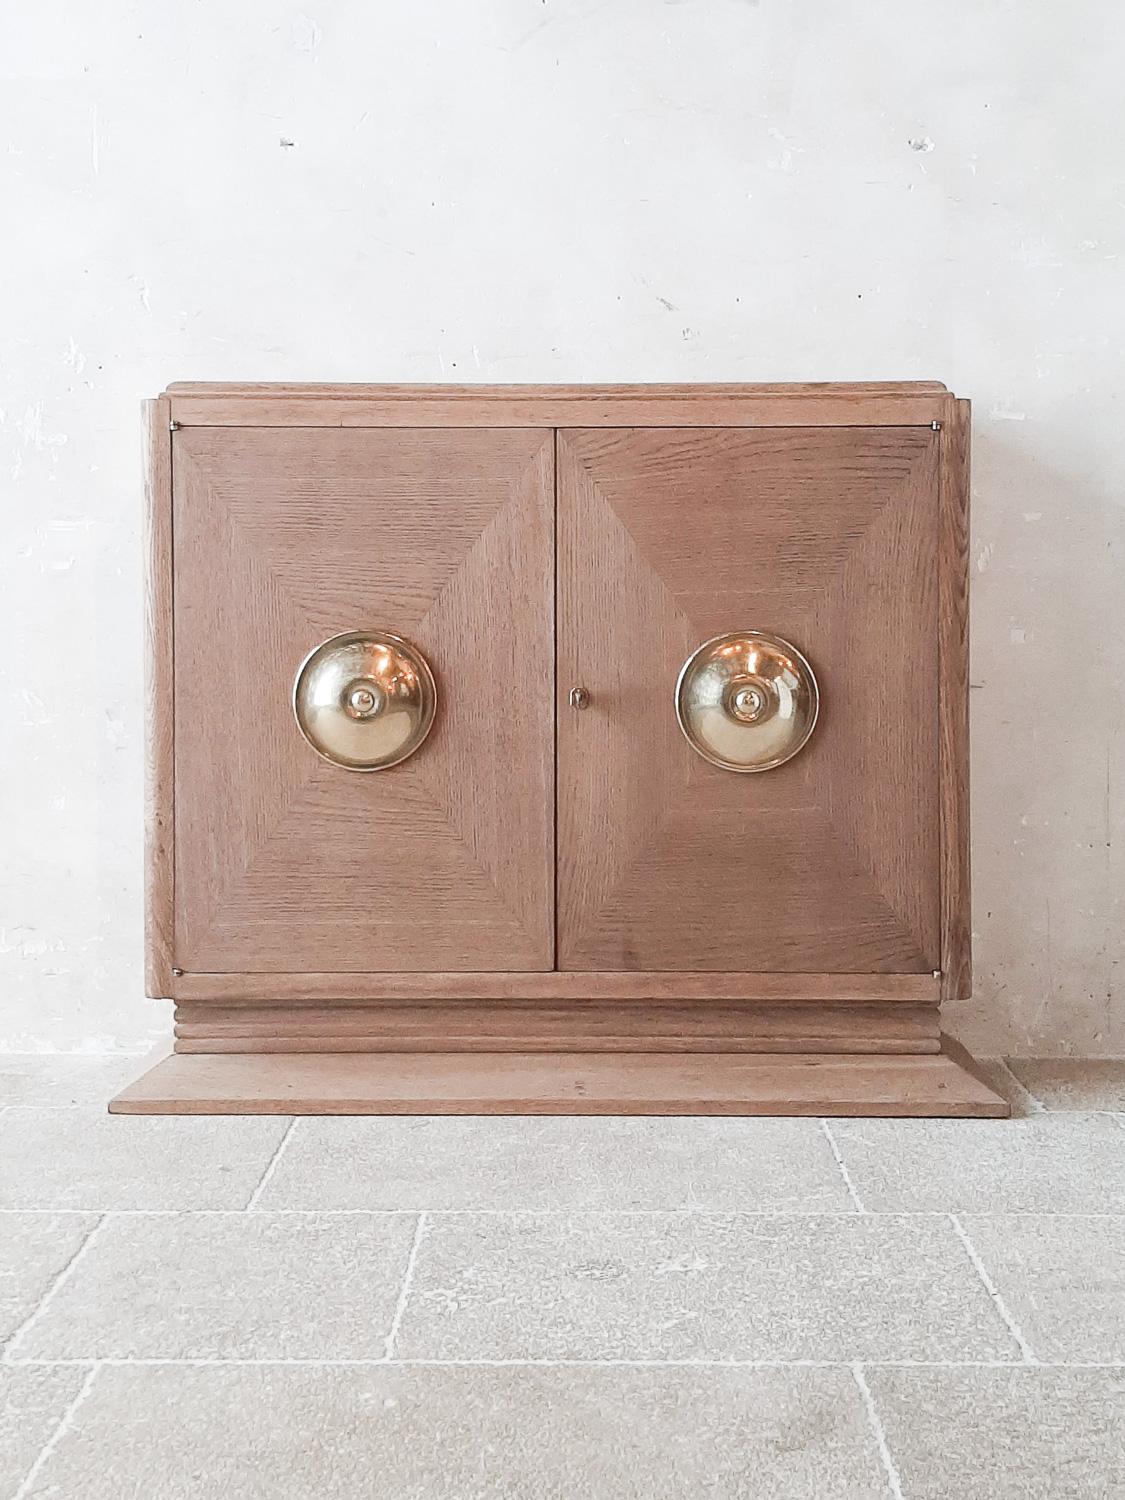 Bleached oak credenza by Charles Dudouyt from the 1940s. Midcentury Art Deco style sideboard with a large round brass detail on the middle of the doors.

Measures: H 101 x W 115 x D 31 cm.

Good condition, wear consistance with age and use, few